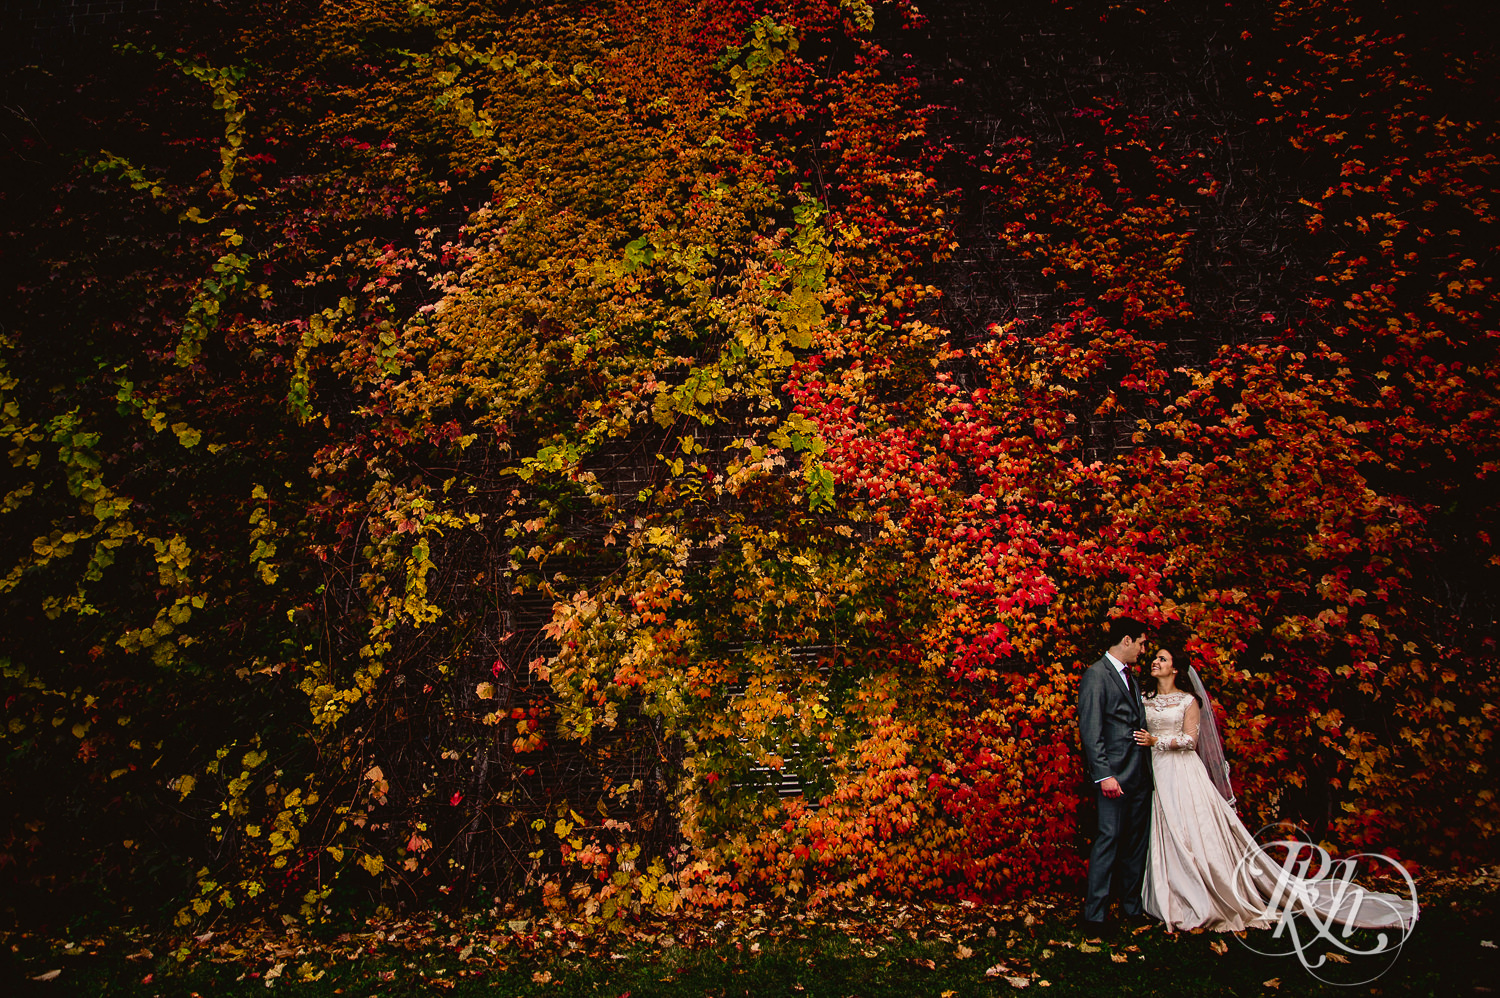 Bride and groom smile in front of a wall covered in red and orange leaves on a rainy wedding day in Minneapolis, Minnesota.